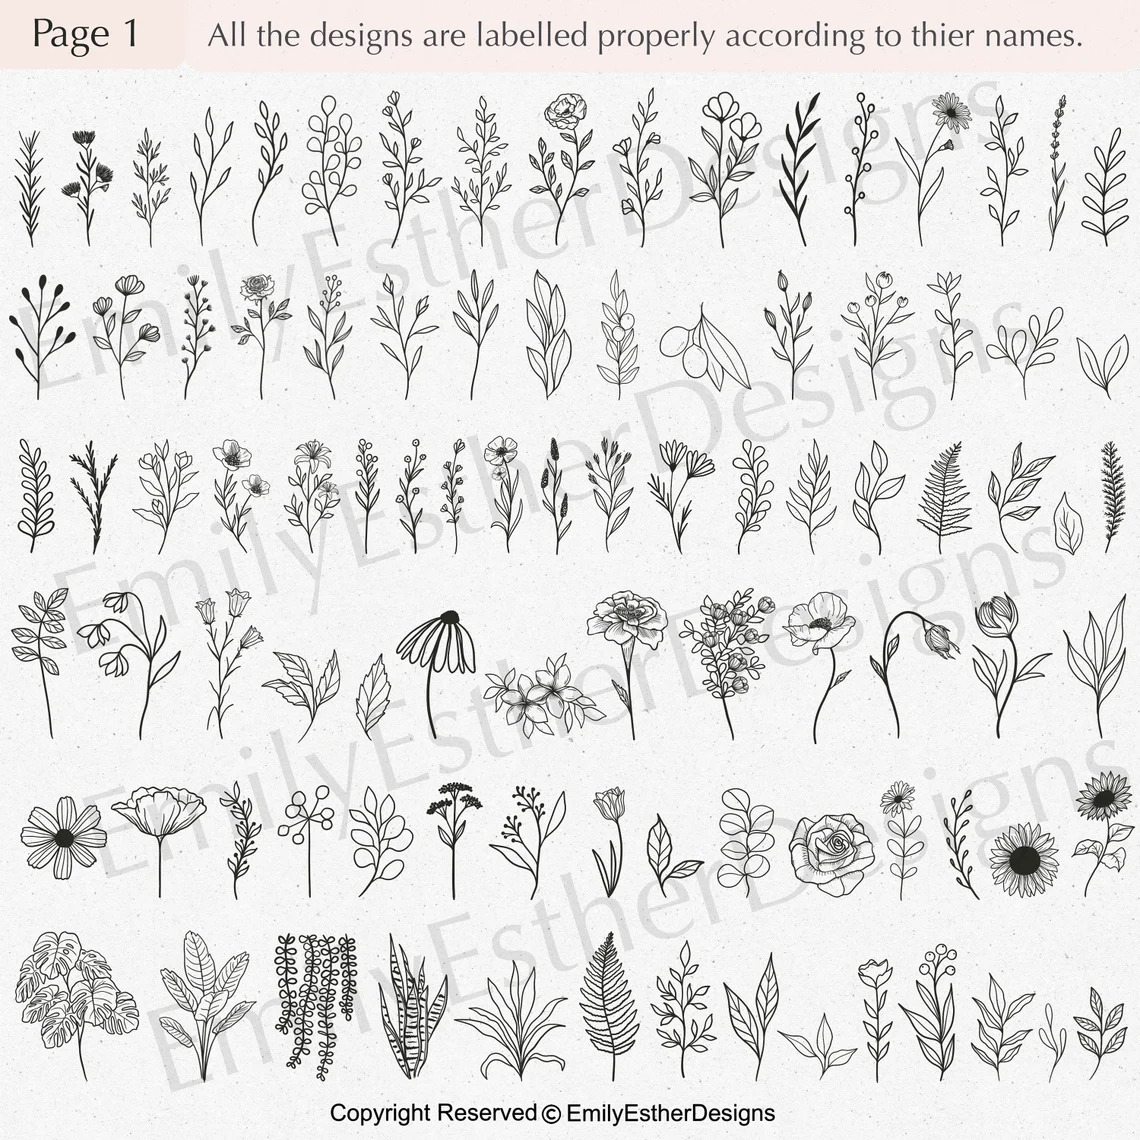 Images of different plants on a white background.